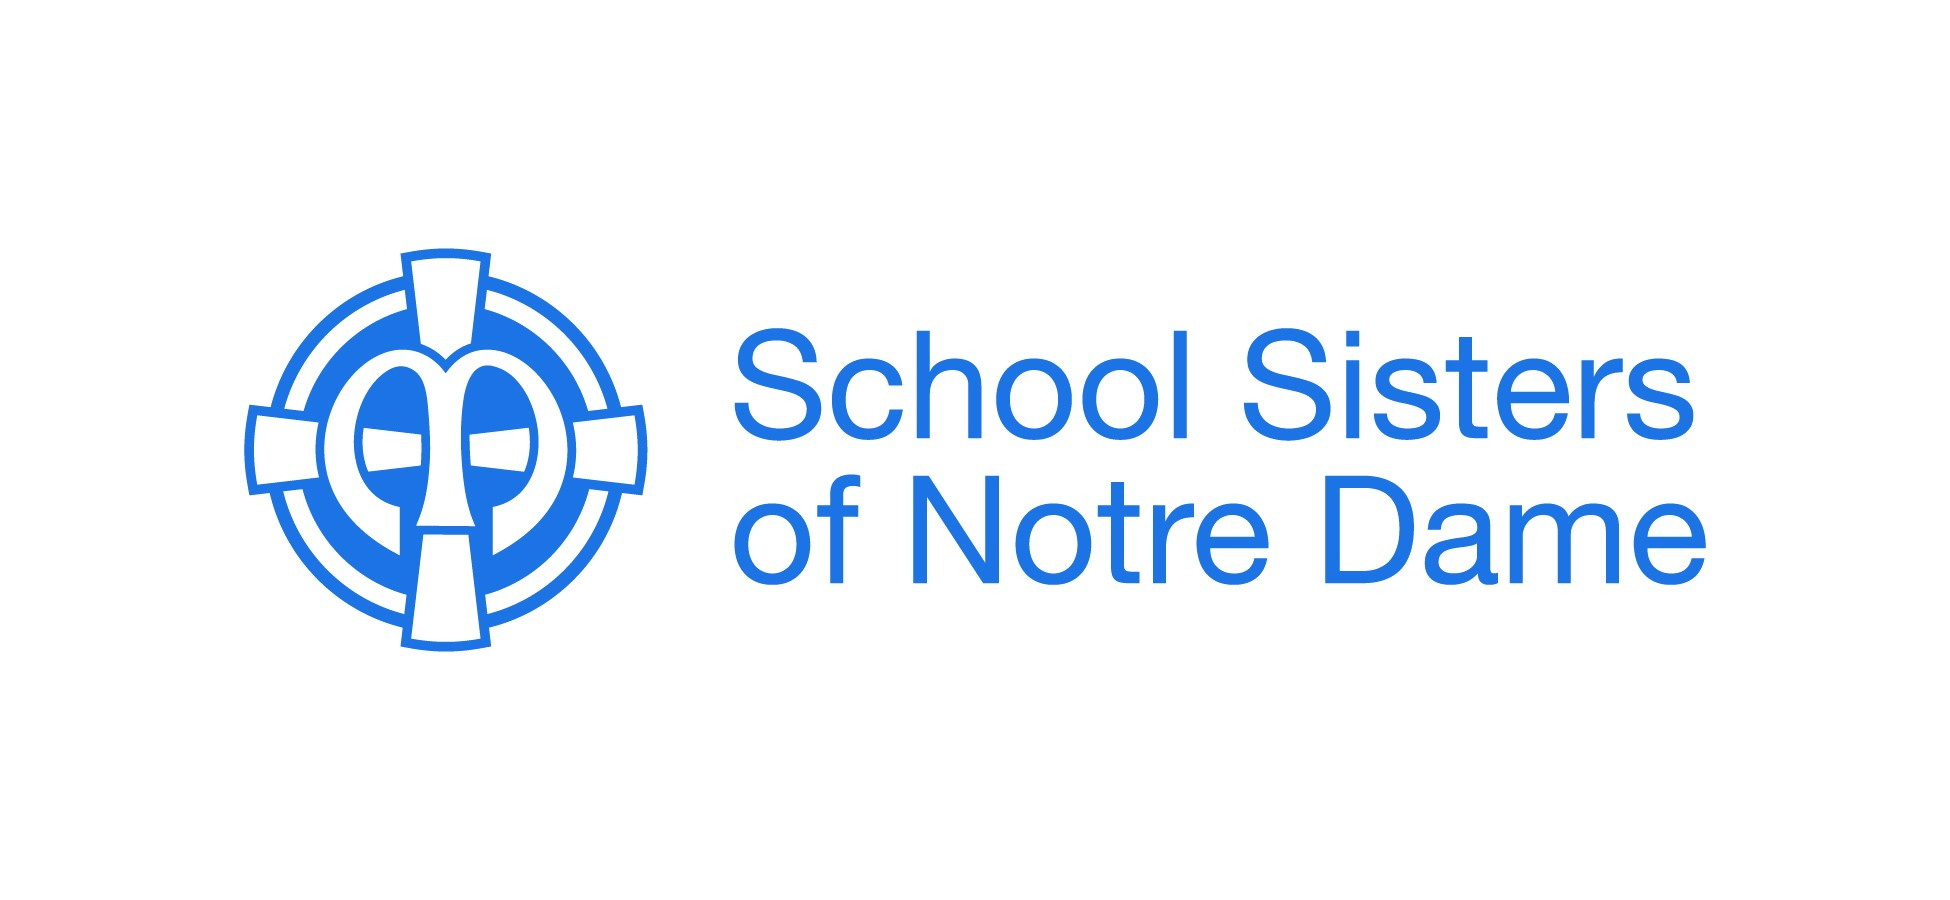 A stylized cross in denim blue with the wrods School Sisters of Notre Dame set on two lines beside it.